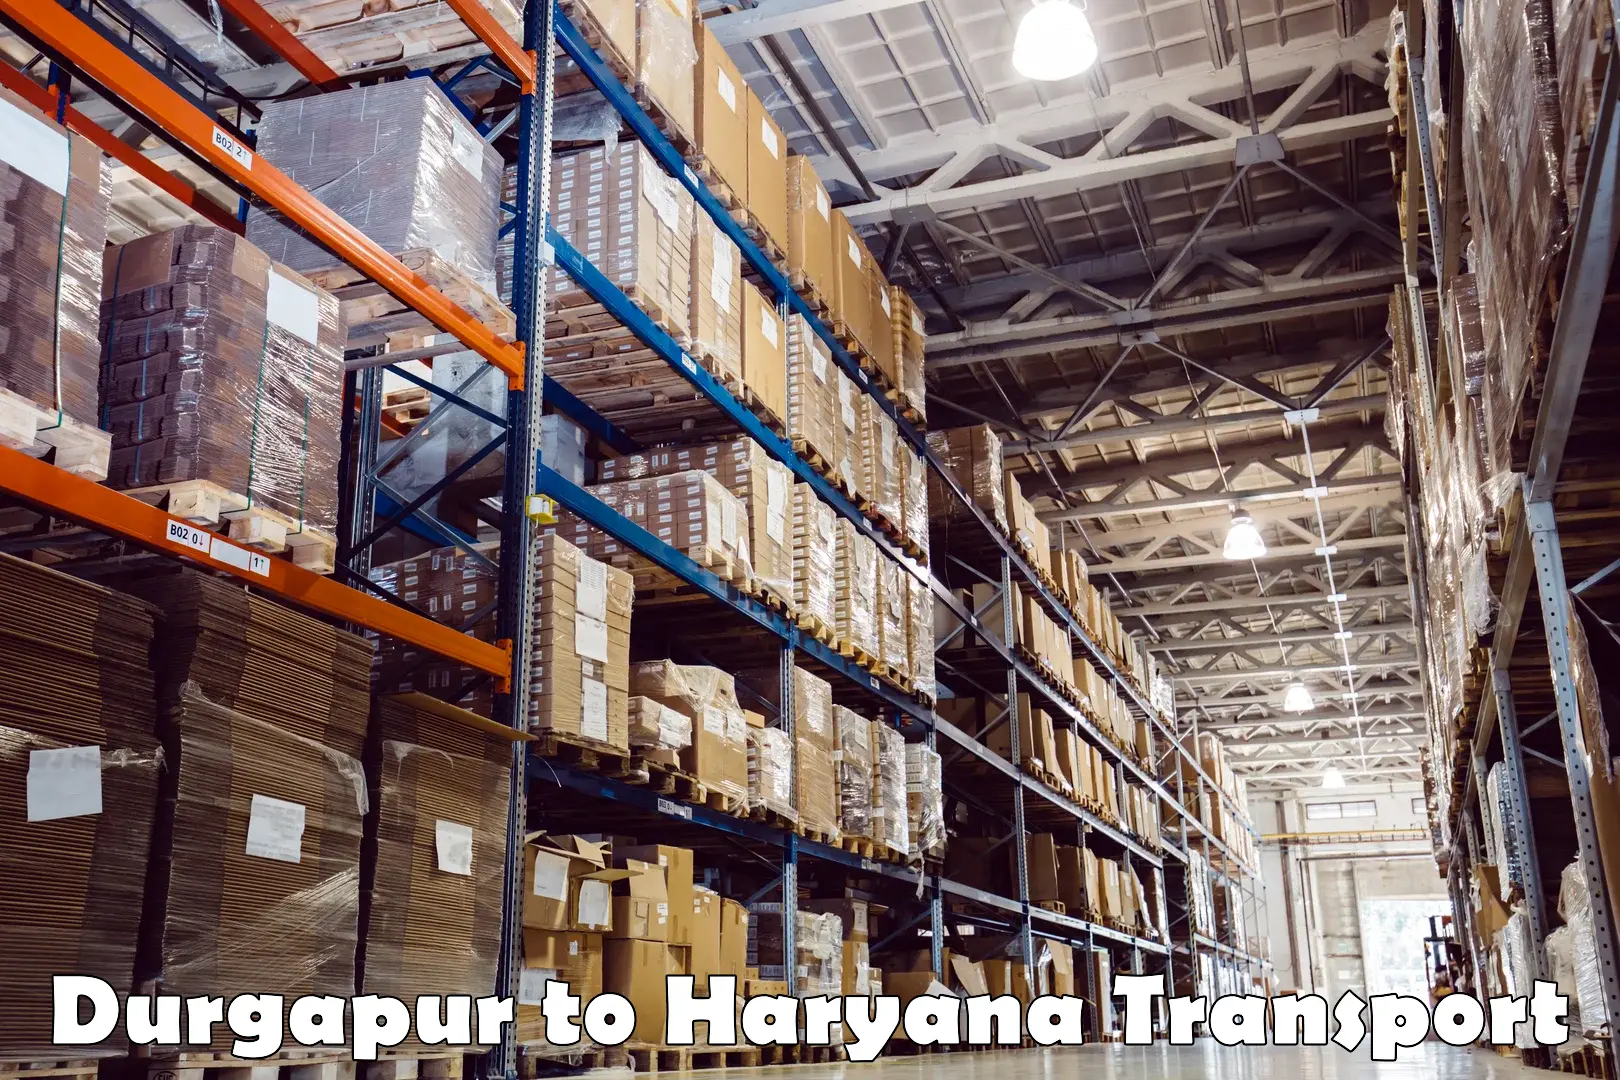 Container transport service Durgapur to Haryana